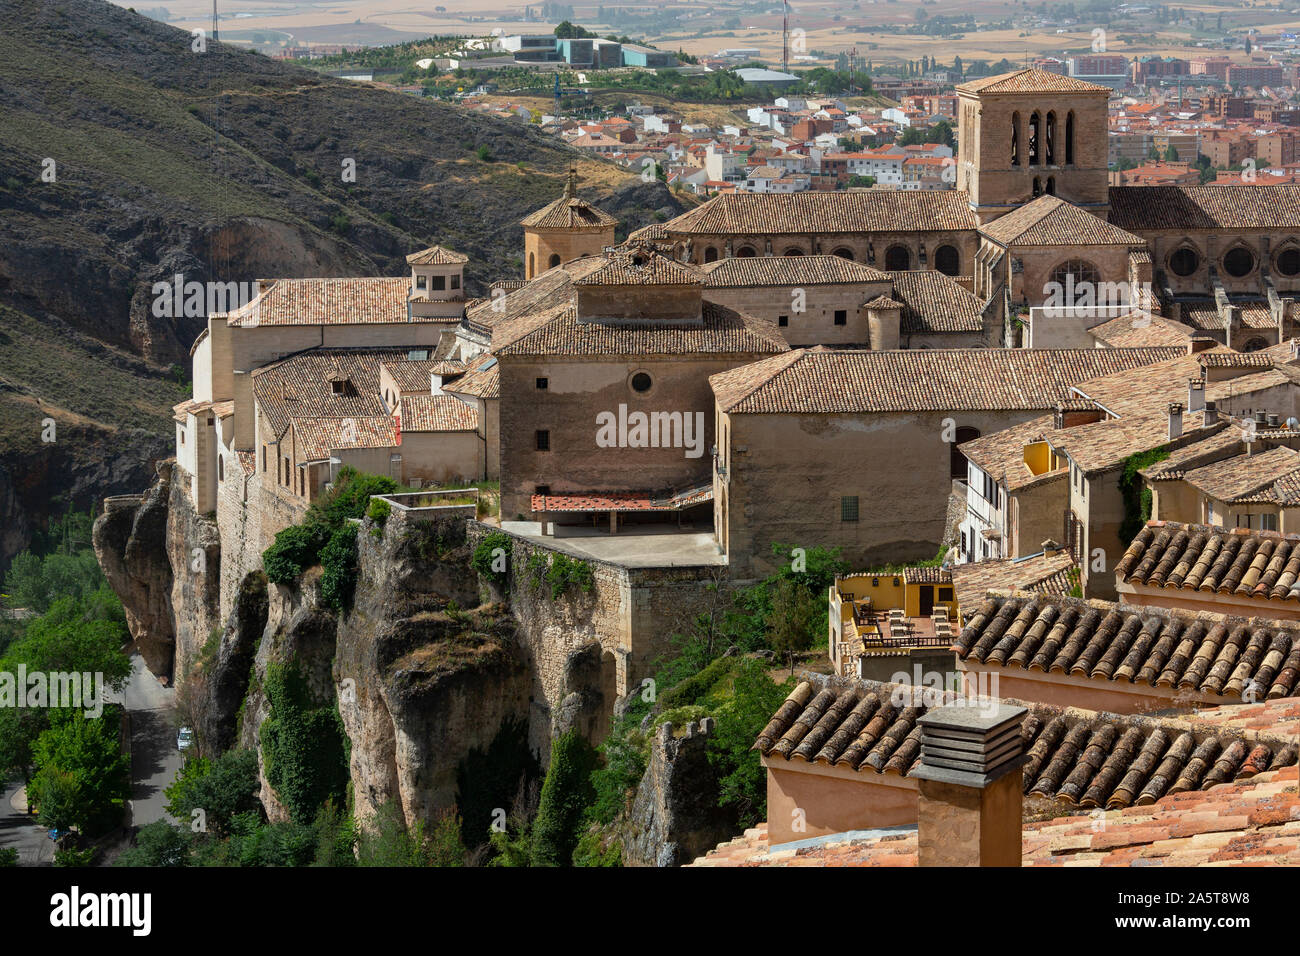 The old town area of Cuenca in the La Mancha region of central Spain. Stock Photo